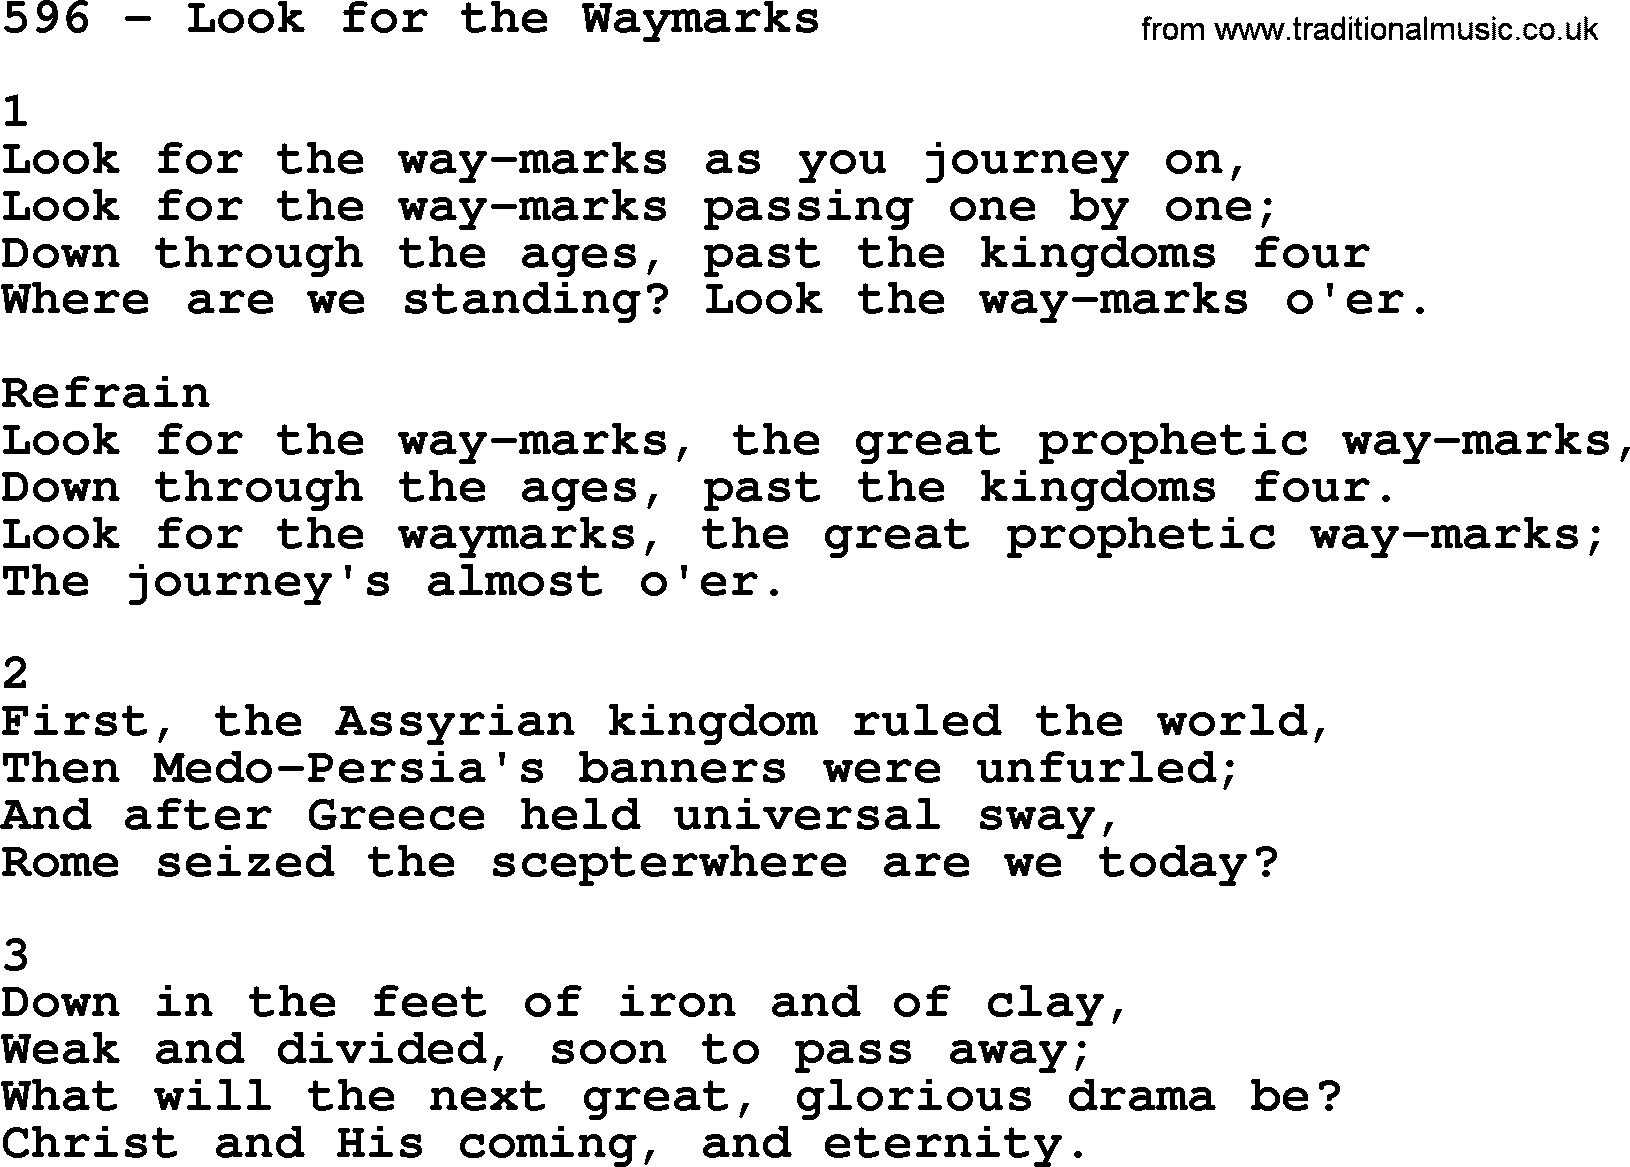 Complete Adventis Hymnal, title: 596-Look For The Waymarks, with lyrics, midi, mp3, powerpoints(PPT) and PDF,